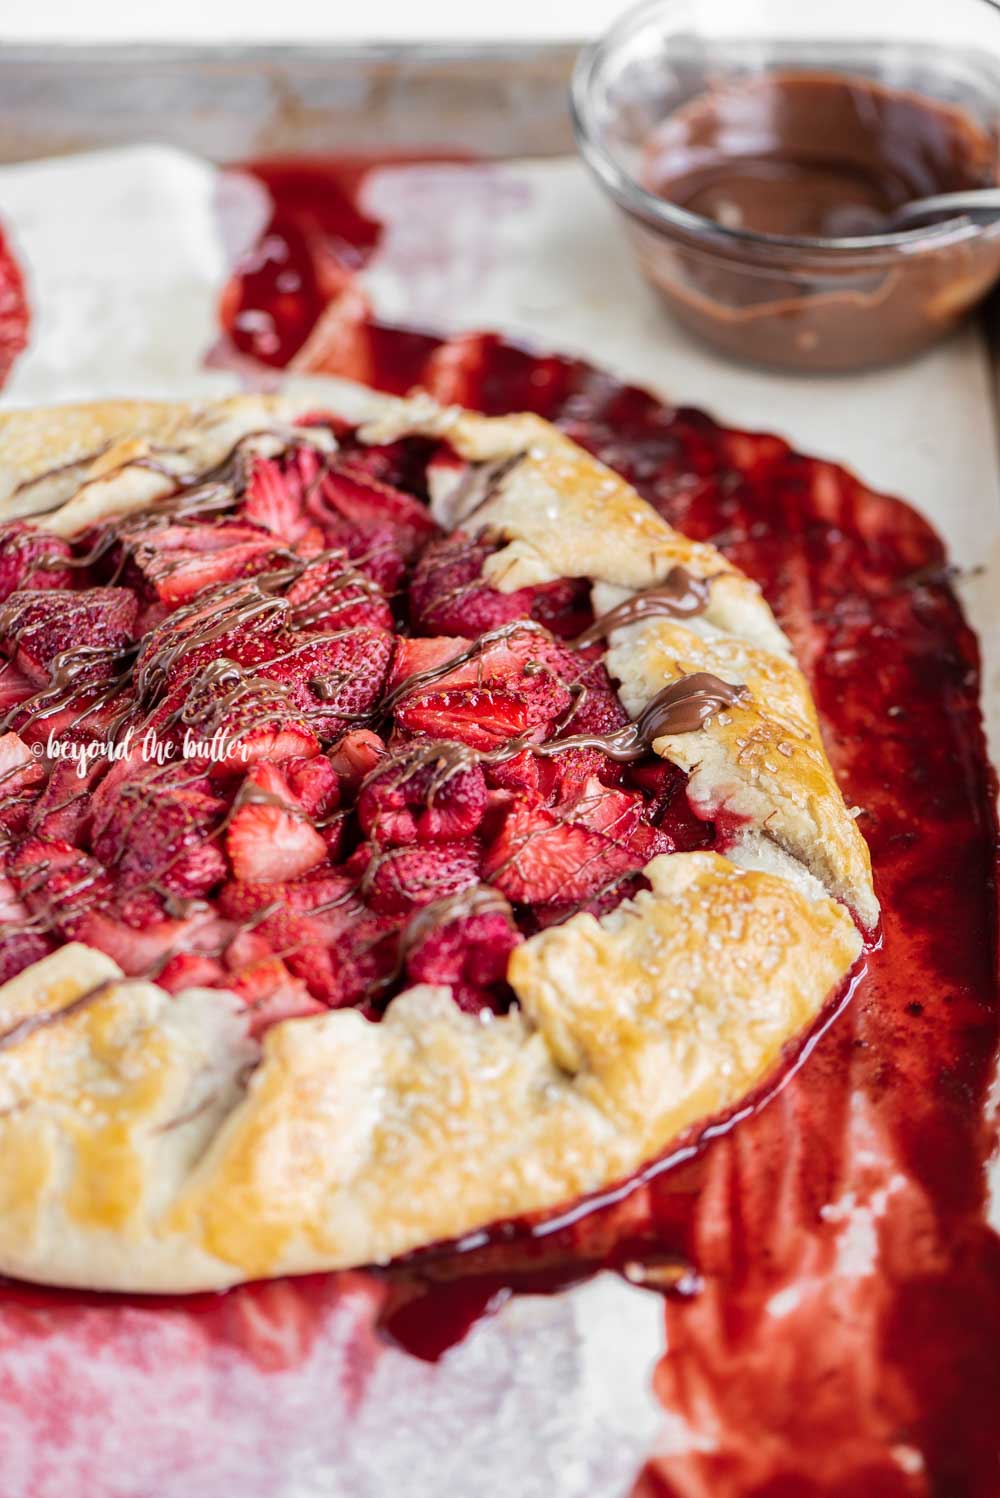 Angled close up image of a Berry Nutella Galette on a baking sheet with Nutella drizzled over the top | All Images © Beyond the Butter™